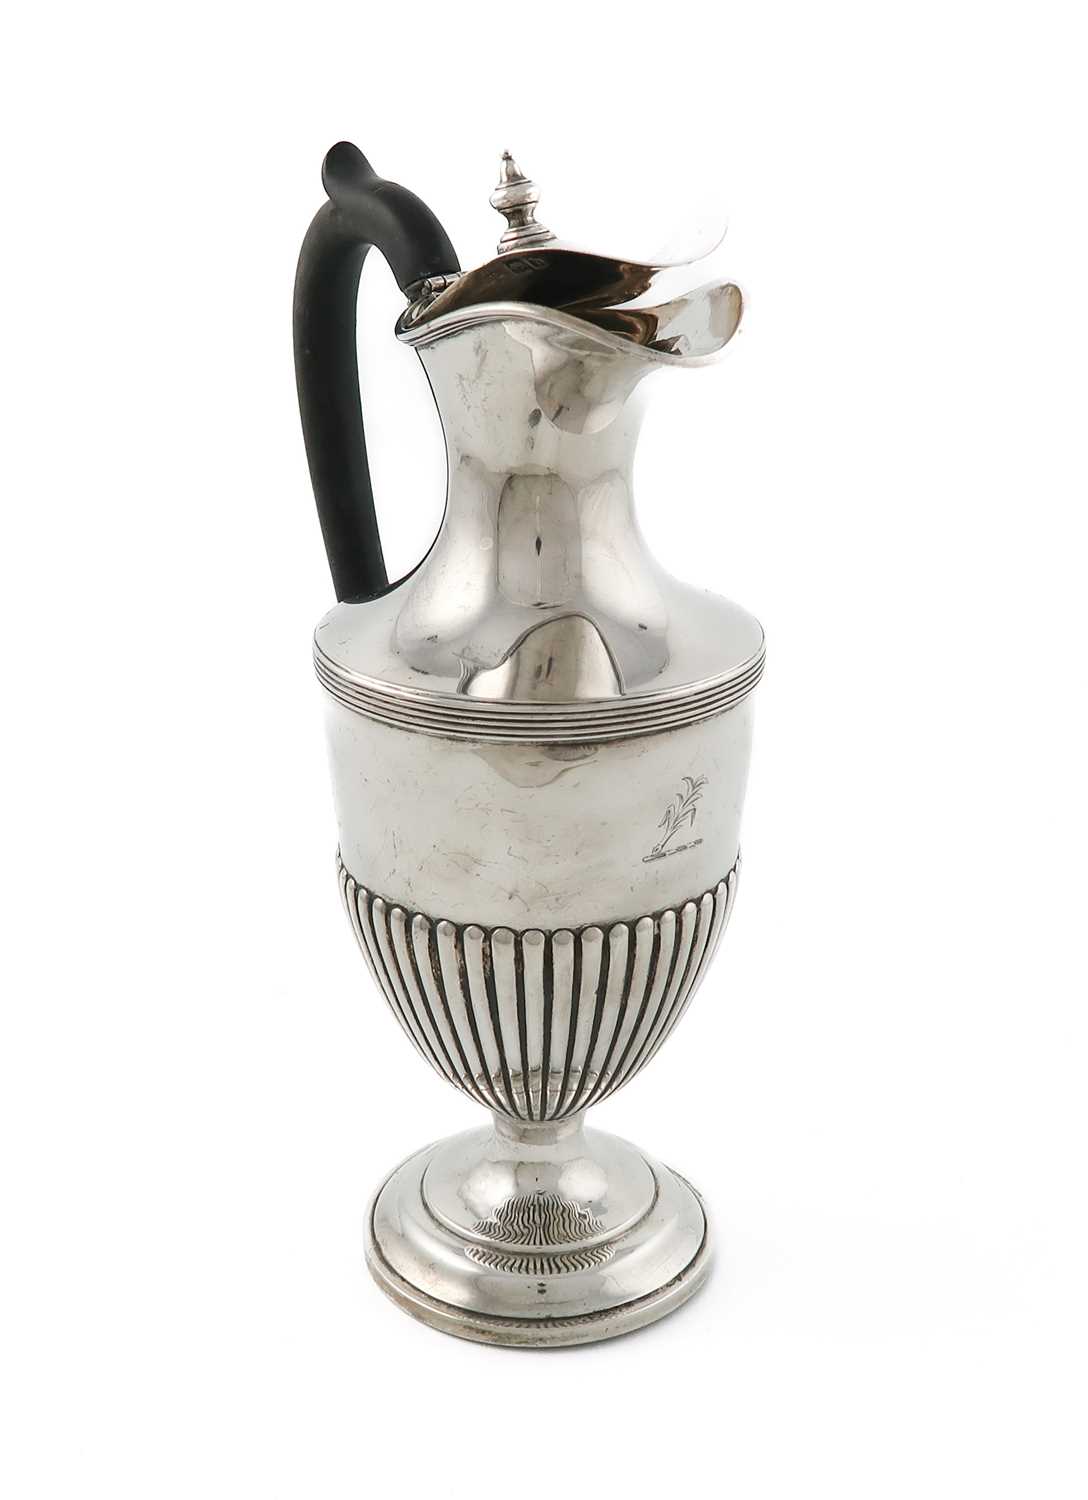 A late-Victorian silver hot water pot, by Horace Woodward & Co Ltd, London 1897, vase form, scroll